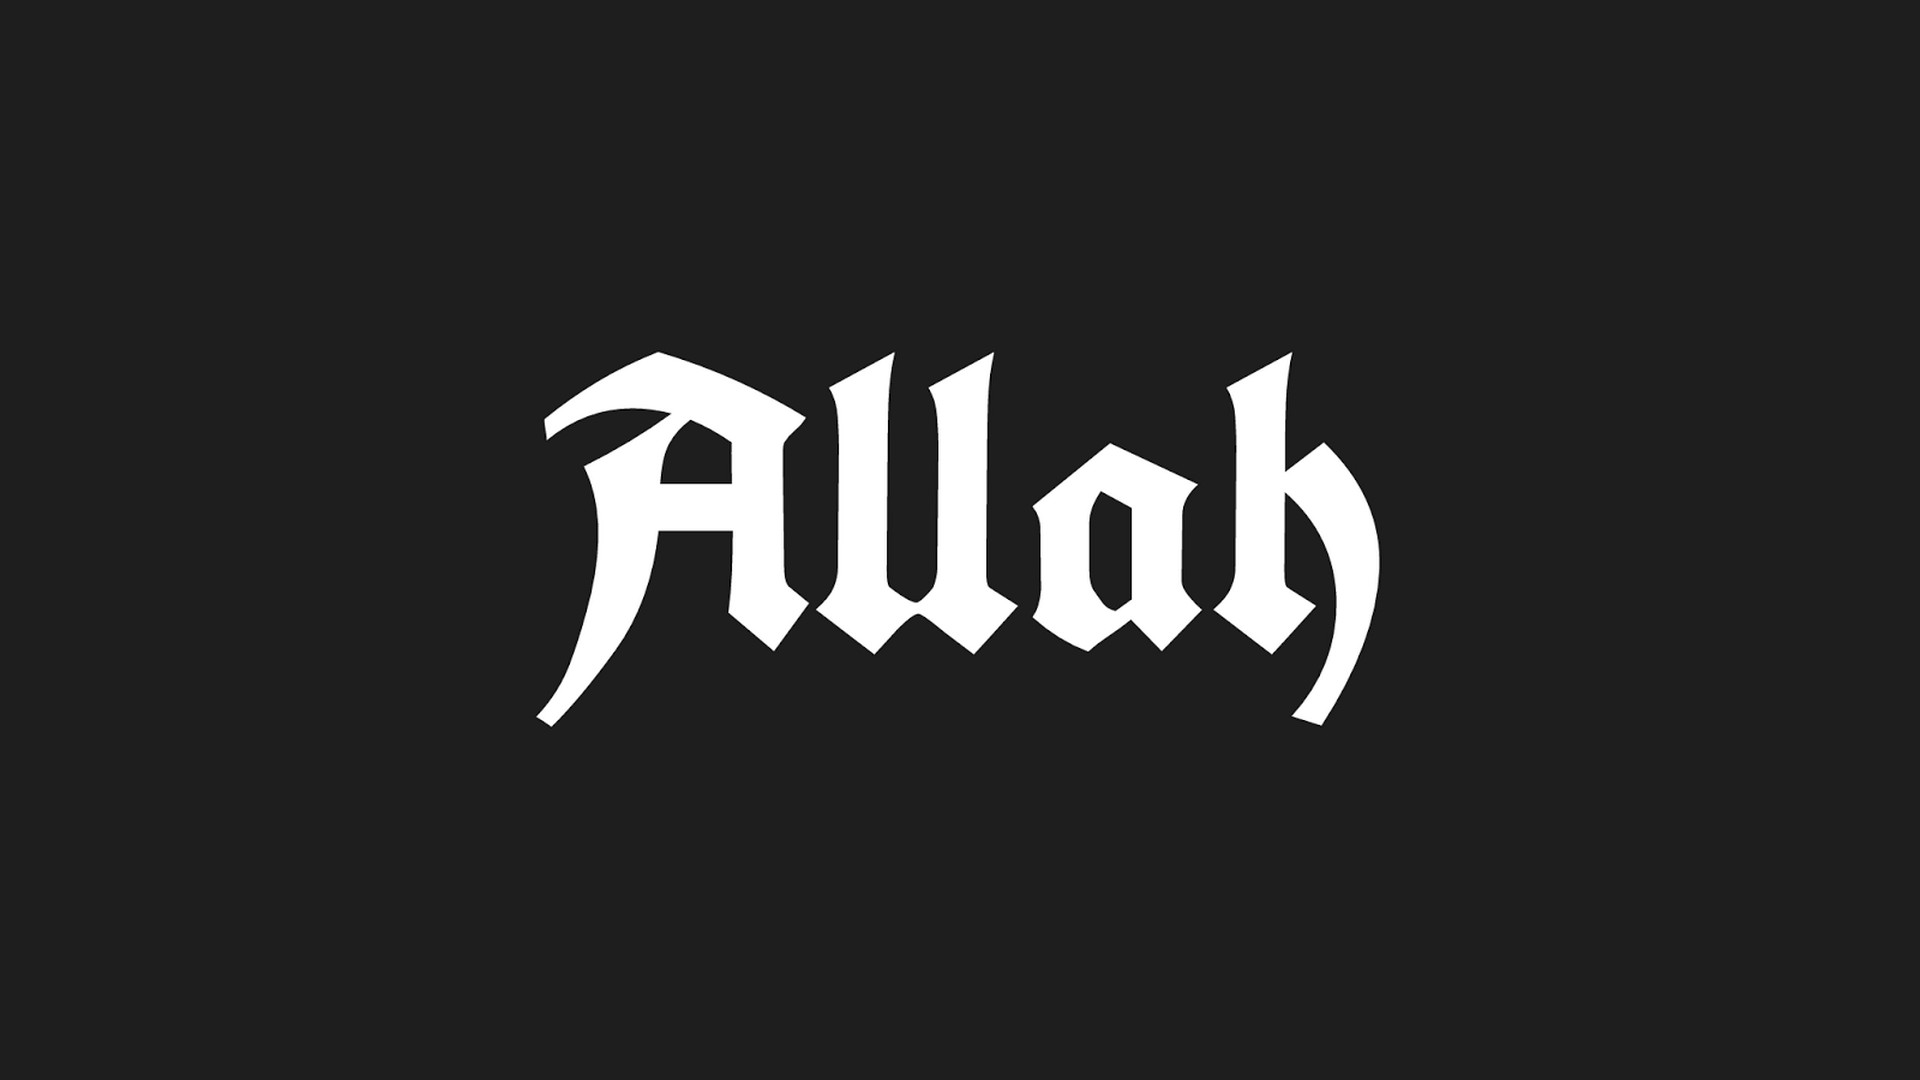 Allah Desktop Wallpapers with high-resolution 1920x1080 pixel. You can use and set as wallpaper for Notebook Screensavers, Mac Wallpapers, Mobile Home Screen, iPhone or Android Phones Lock Screen